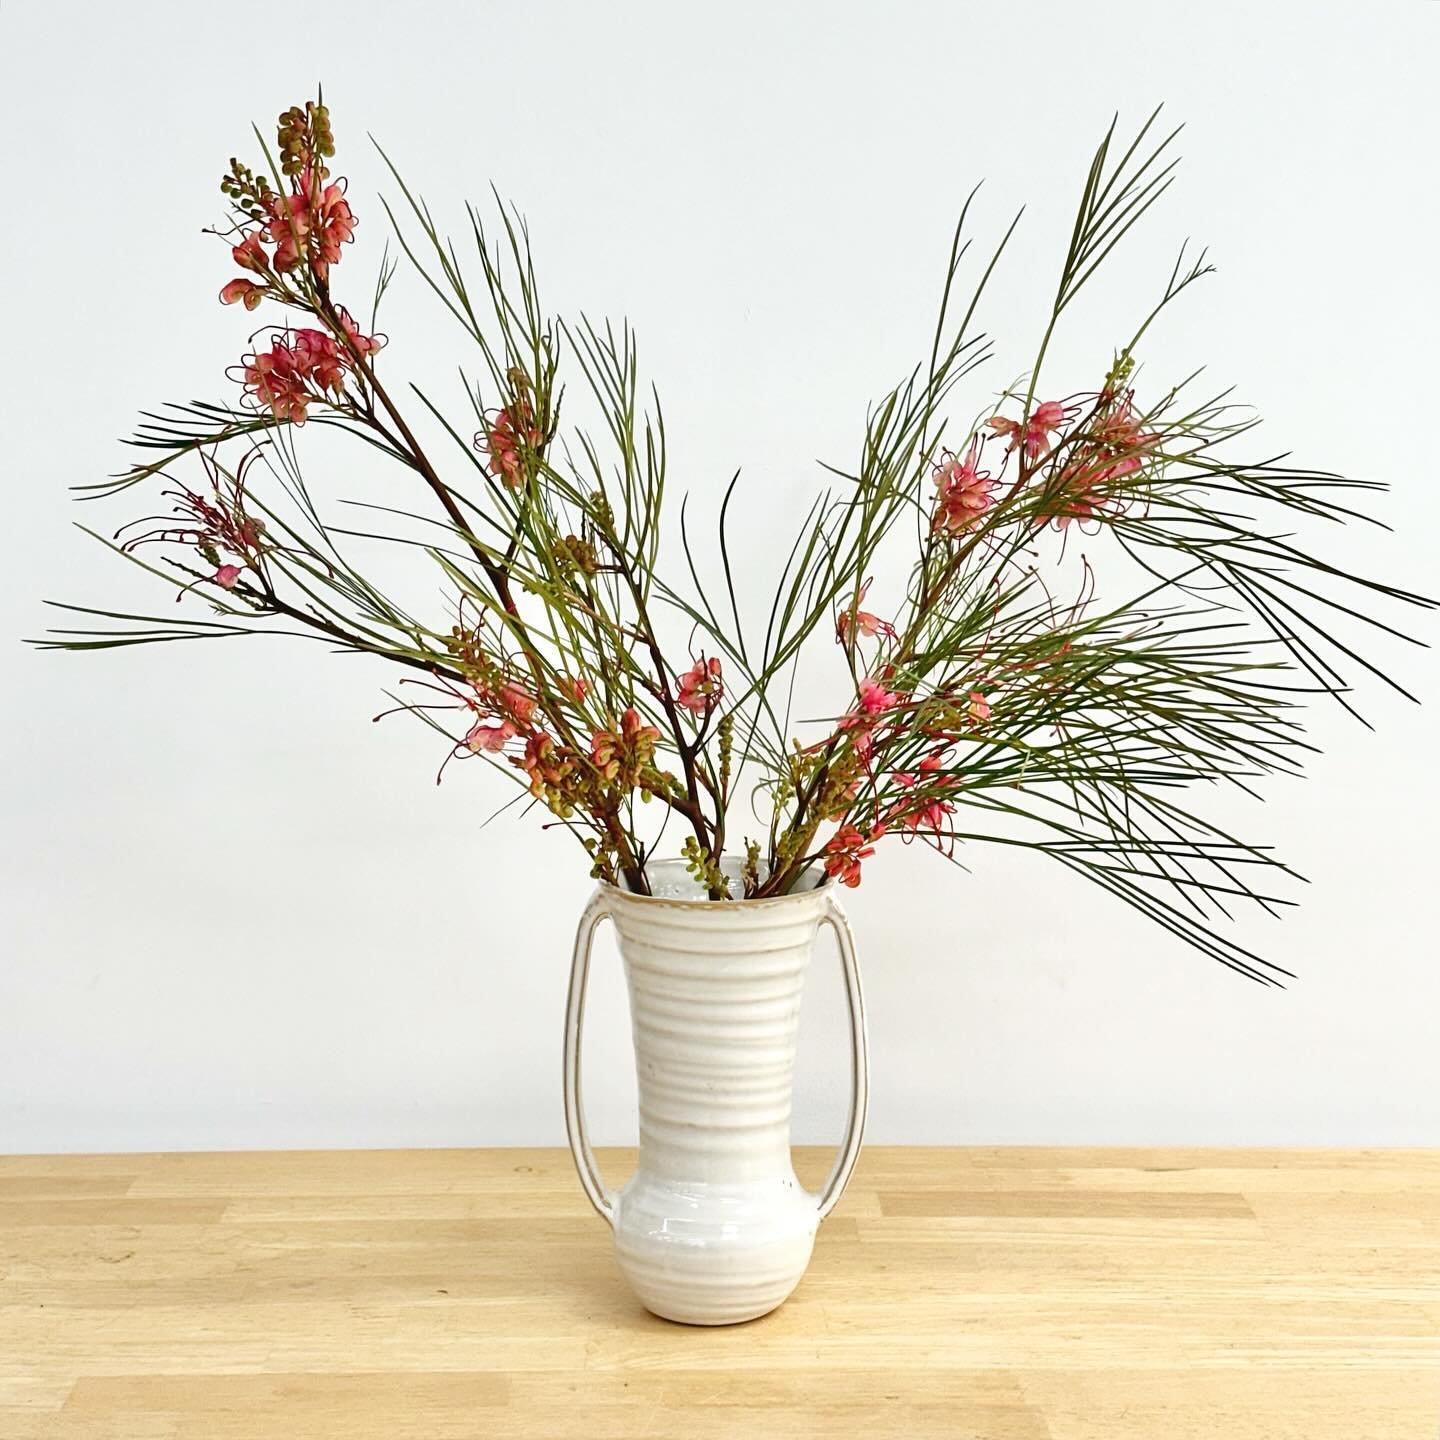 One big bunch of flowering grevillea, two vases (from our new product line!)&hellip;. et voila! A moment of appreciation for monobotanical designs. 🤌🏻✨

We had fun playing around with this unique flowering greenery in some of our new vases. We used